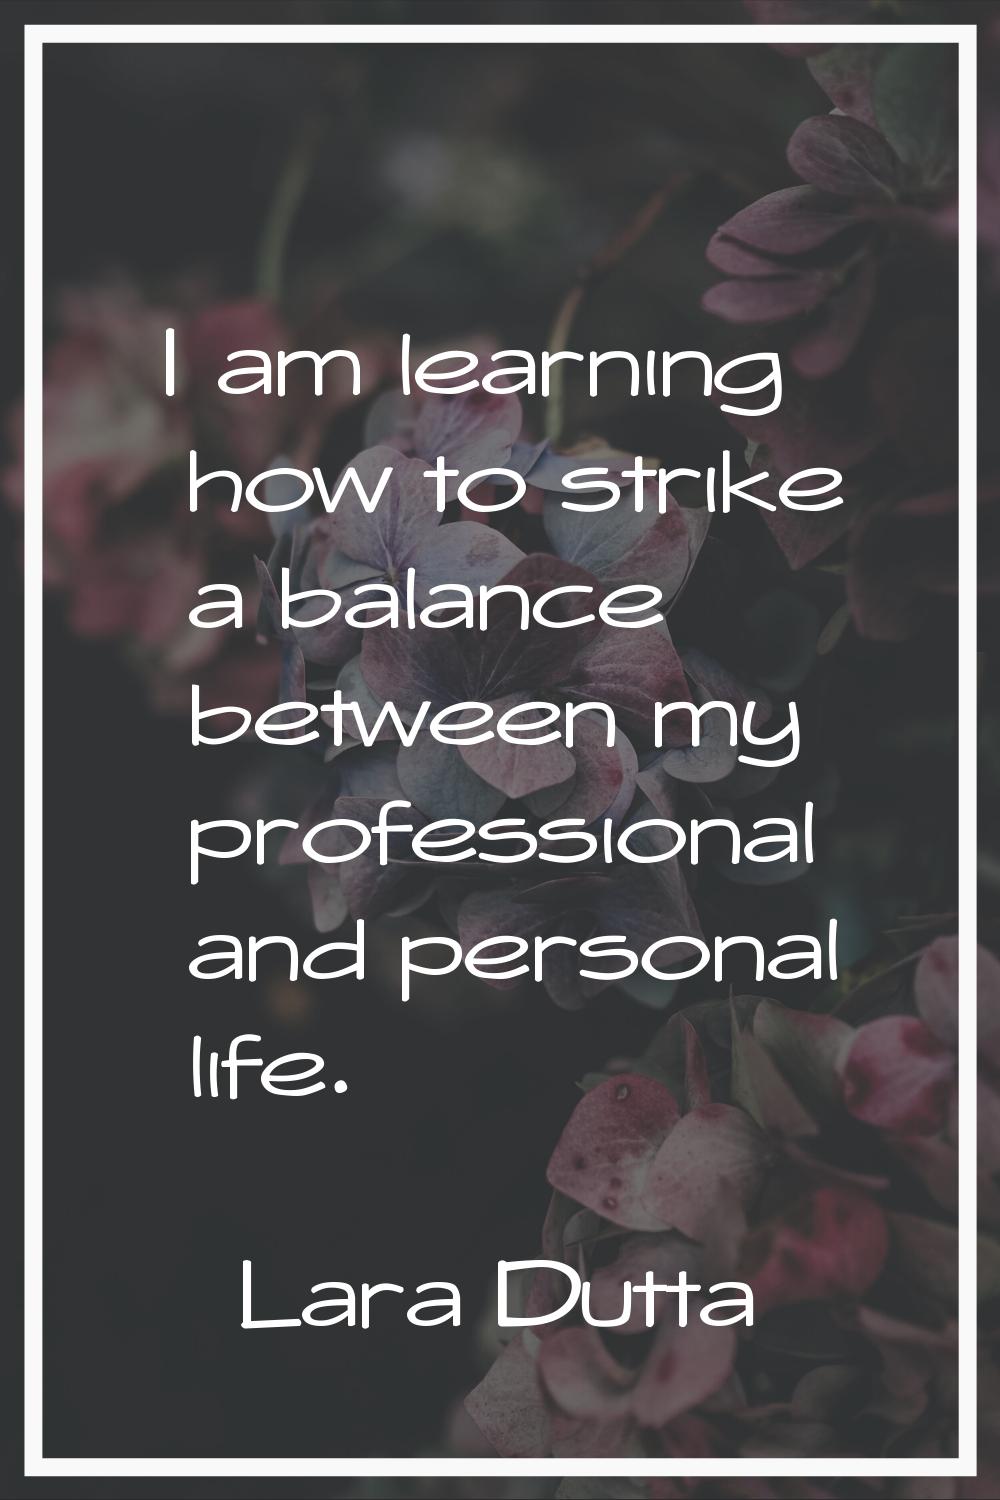 I am learning how to strike a balance between my professional and personal life.